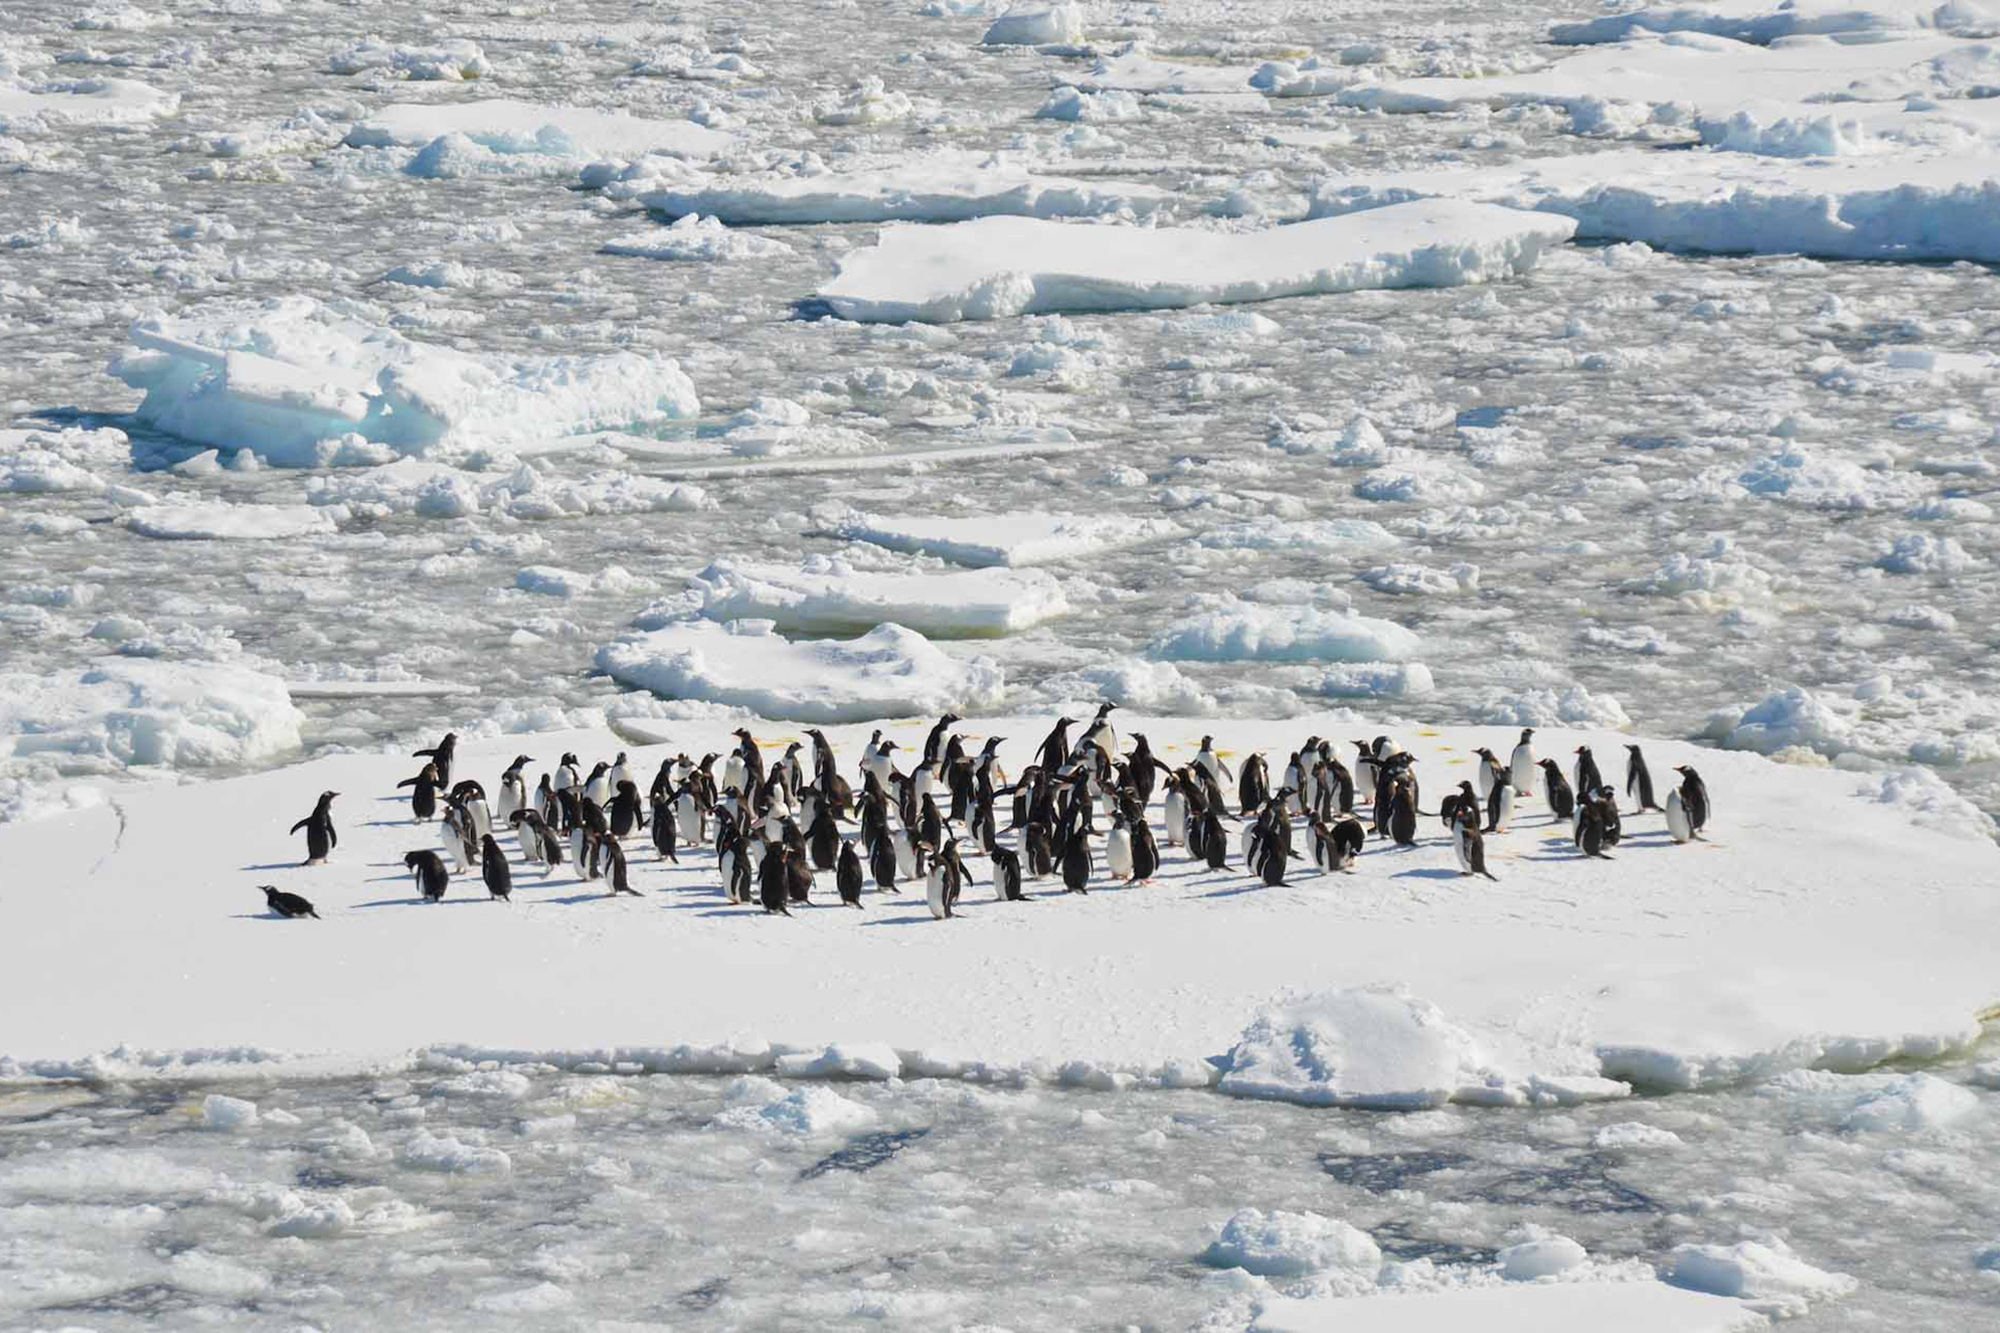 Emperor penguins on a big mass of floating ice. 